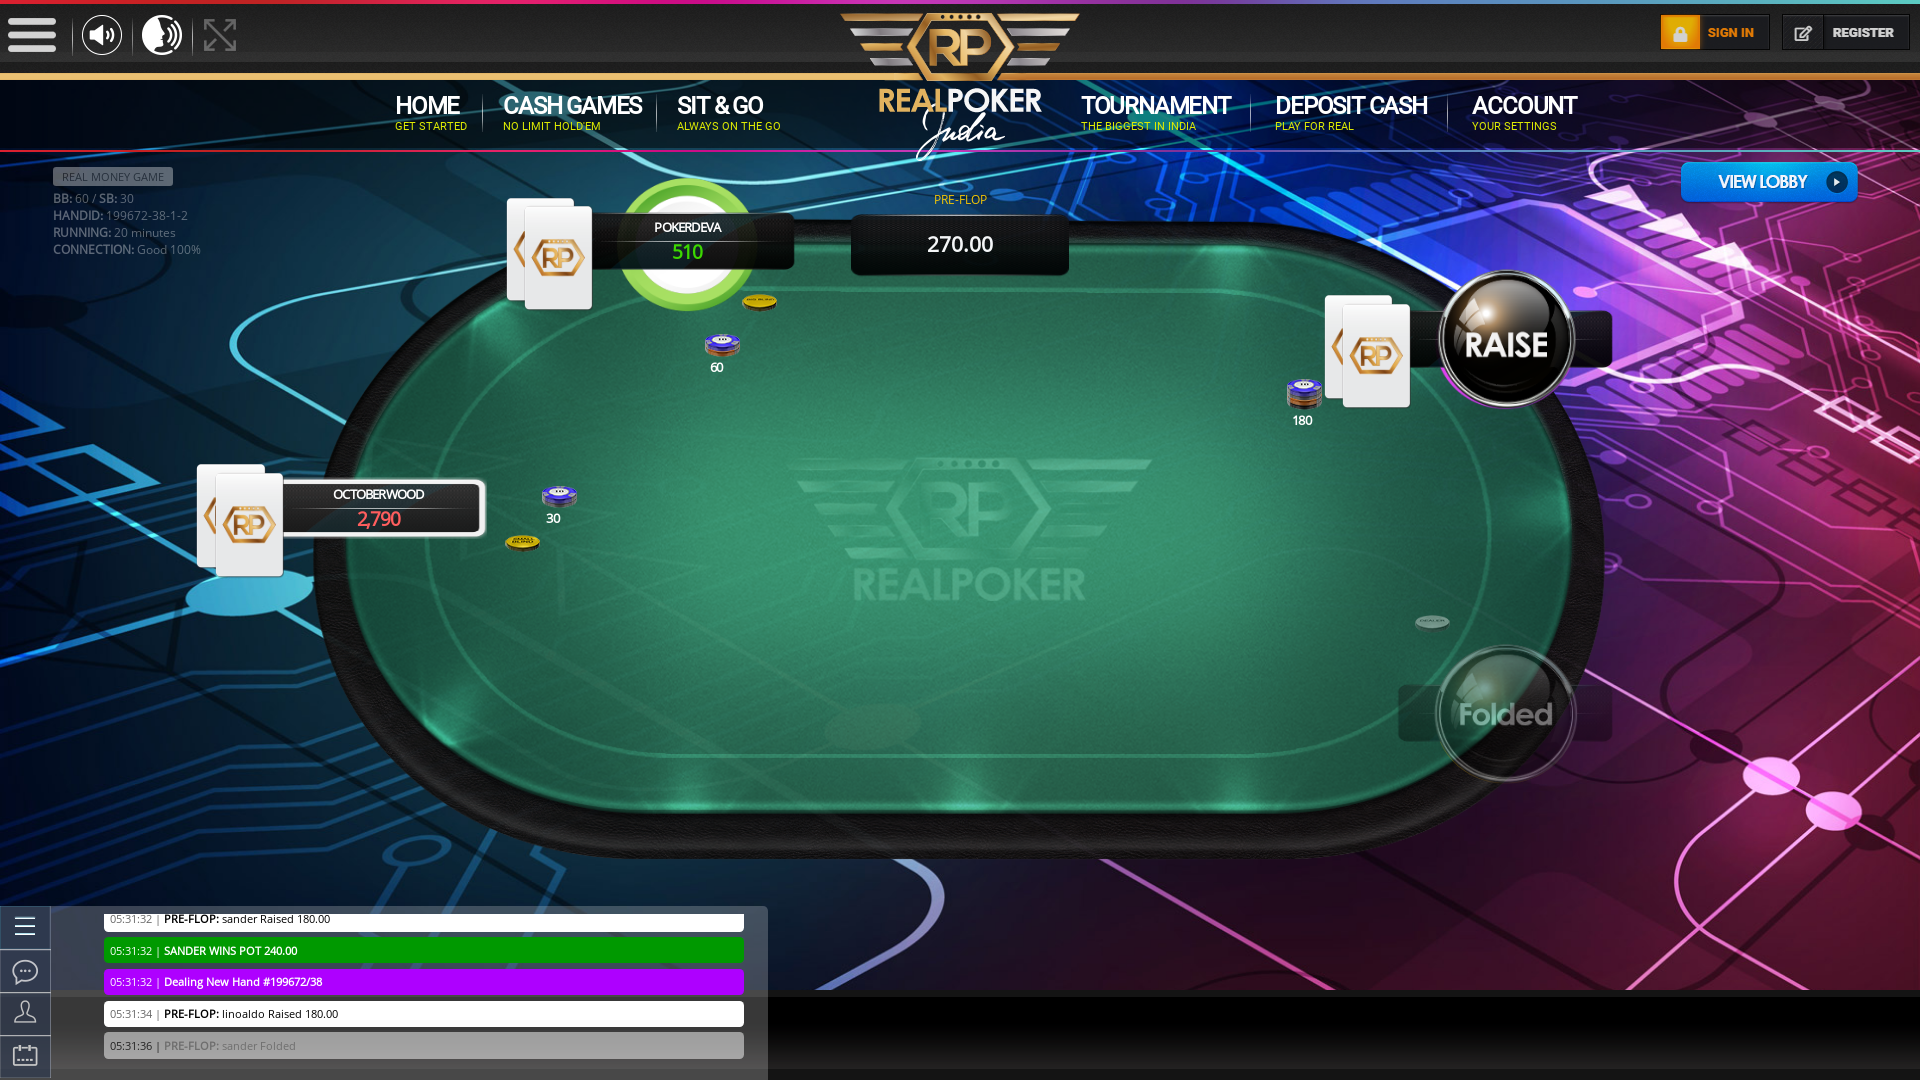 Indian poker on a 10 player table in the 20th minute